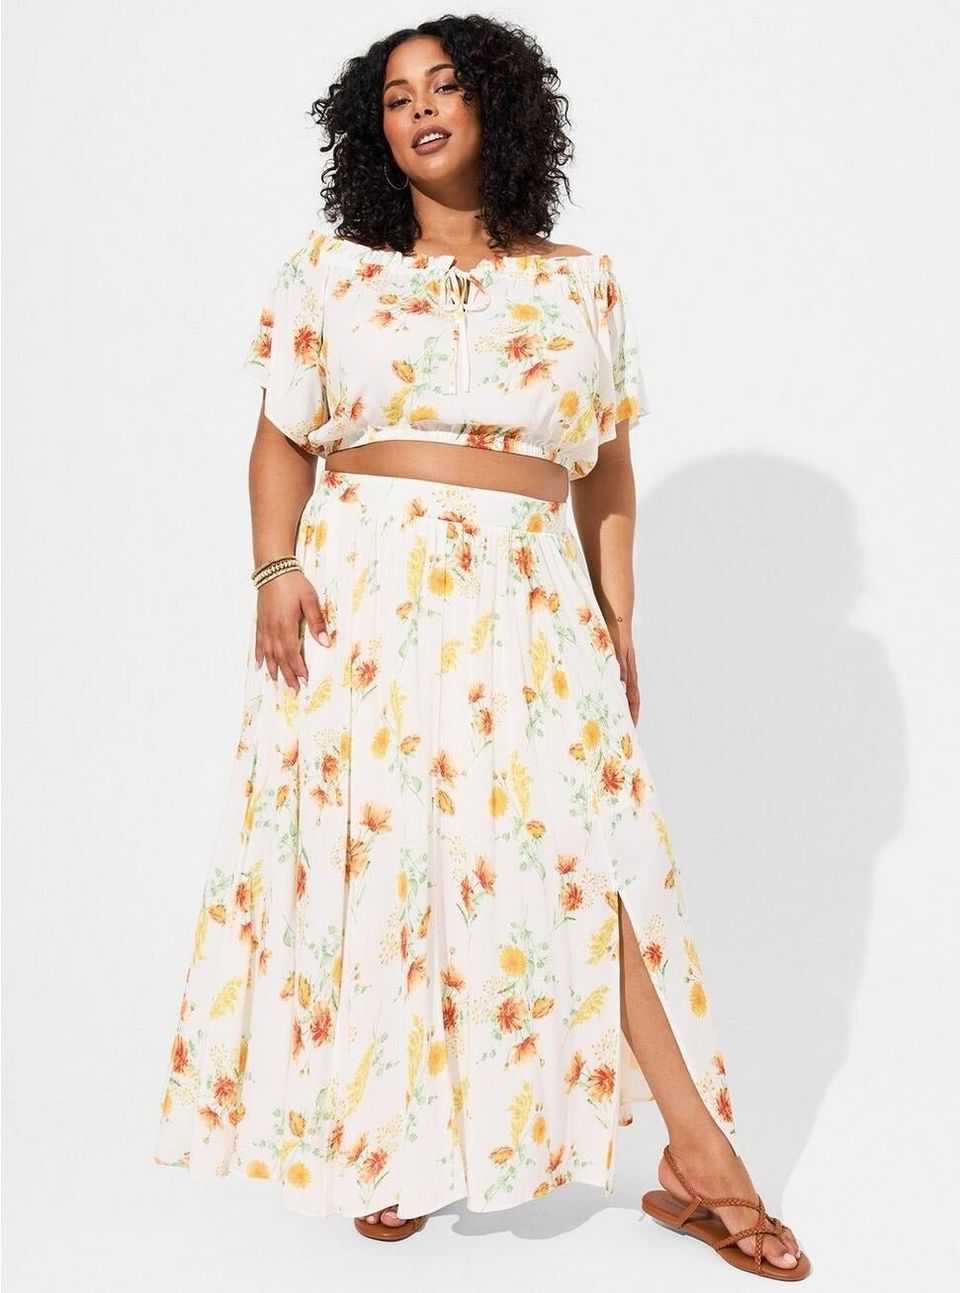 Reviewers Swear By This Beautiful Two-Piece Set for Summer